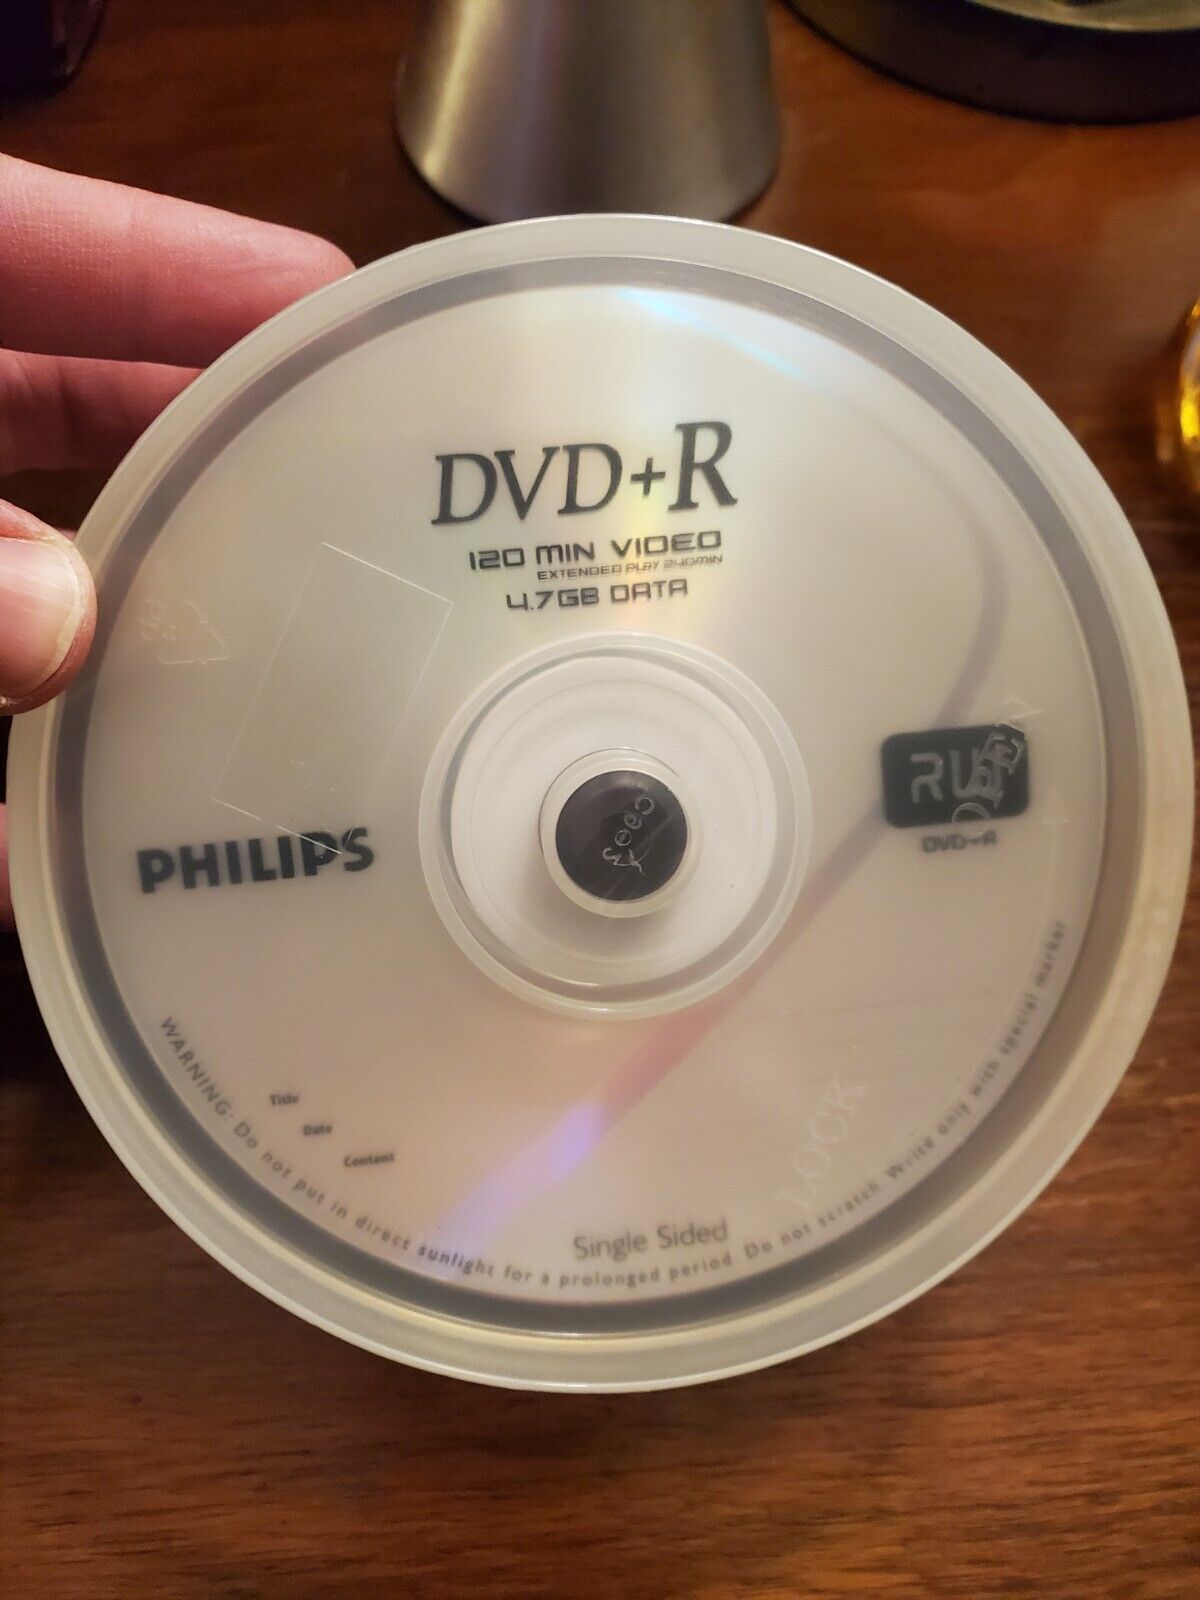 Philips DVD+R RW 4.7GB Data 120 min. 25 Pack Spindle NEW SEALED BLANK MEDIA 